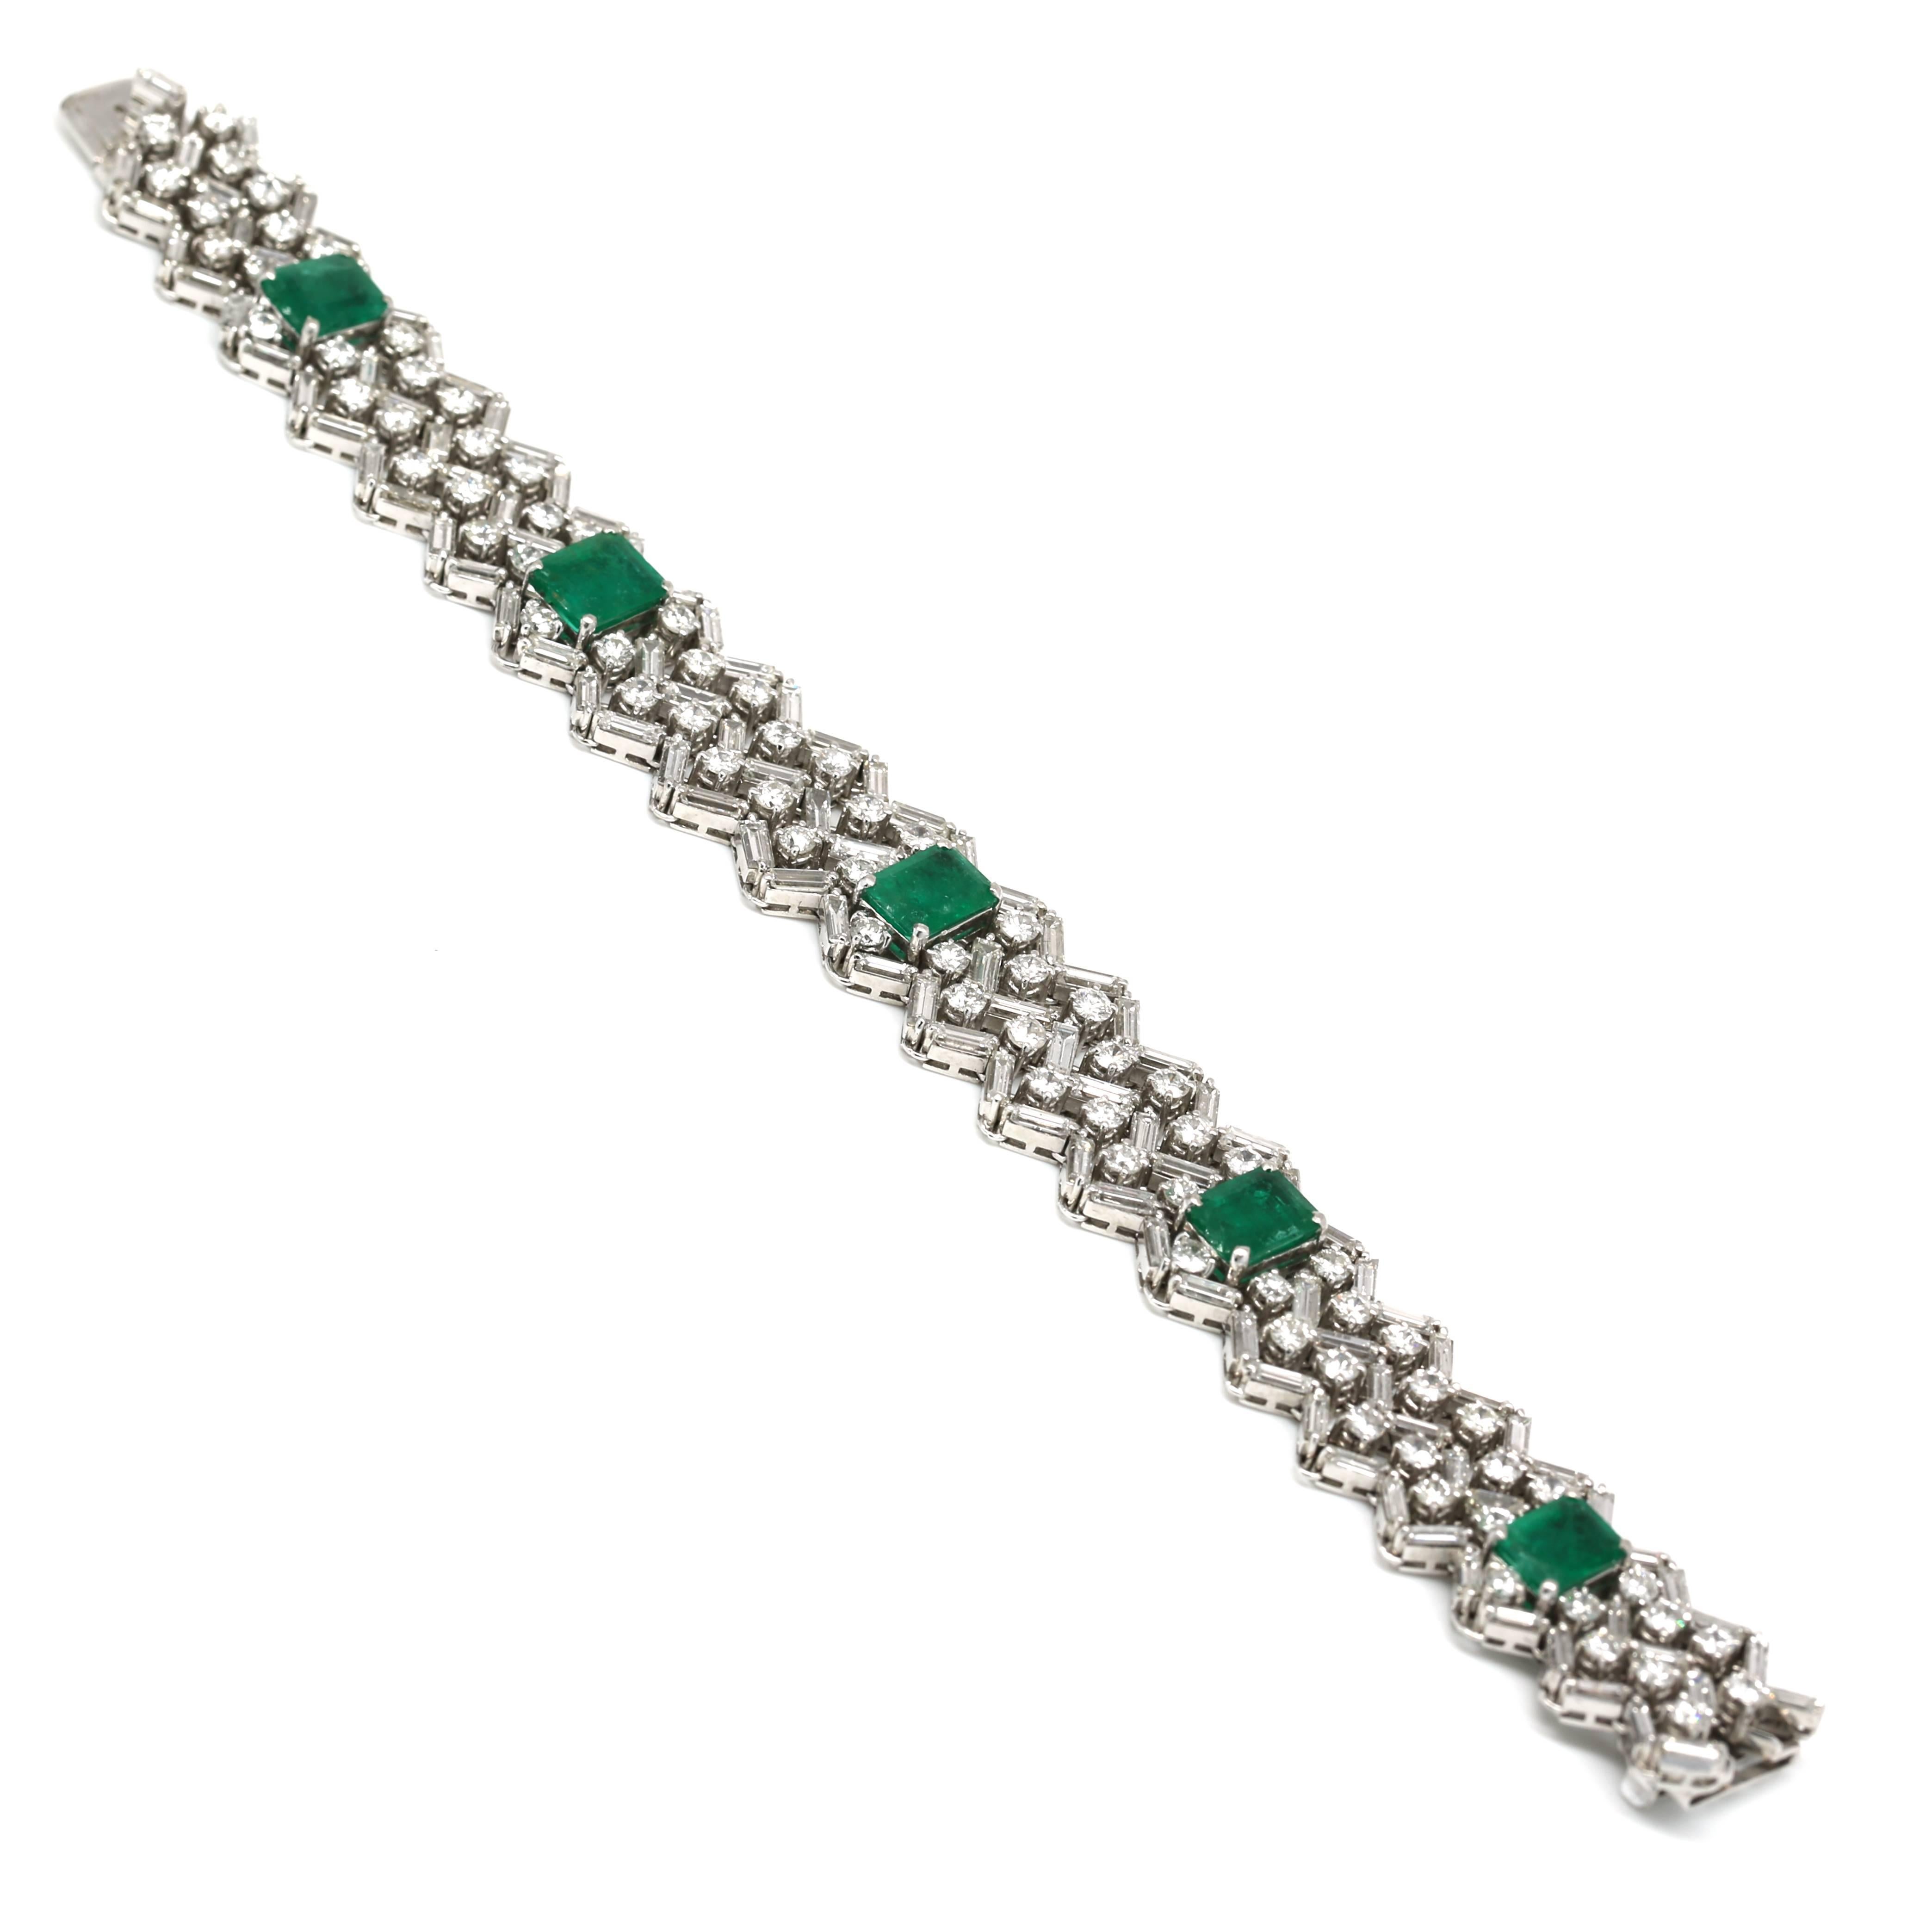 Spectacular Platinum Bracelet set with 16.00 carats of the Finest Quality Diamonds D-E Color VVS-VS Clarity. Featuring 5 Colombian Emeralds Weighing Approx. 10.00 Carats